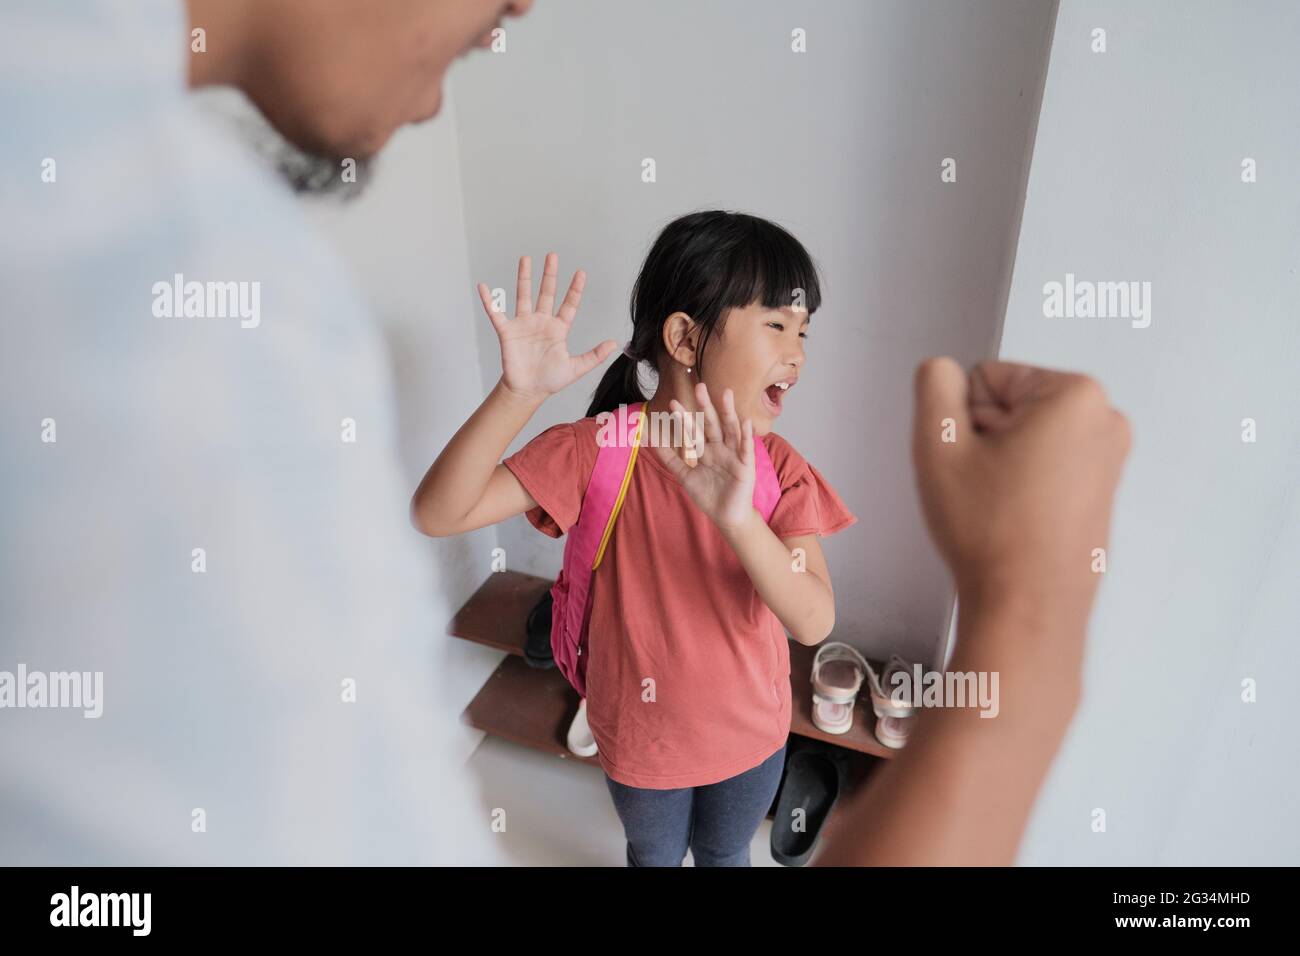 abusive parent try to hit his kid at home Stock Photo